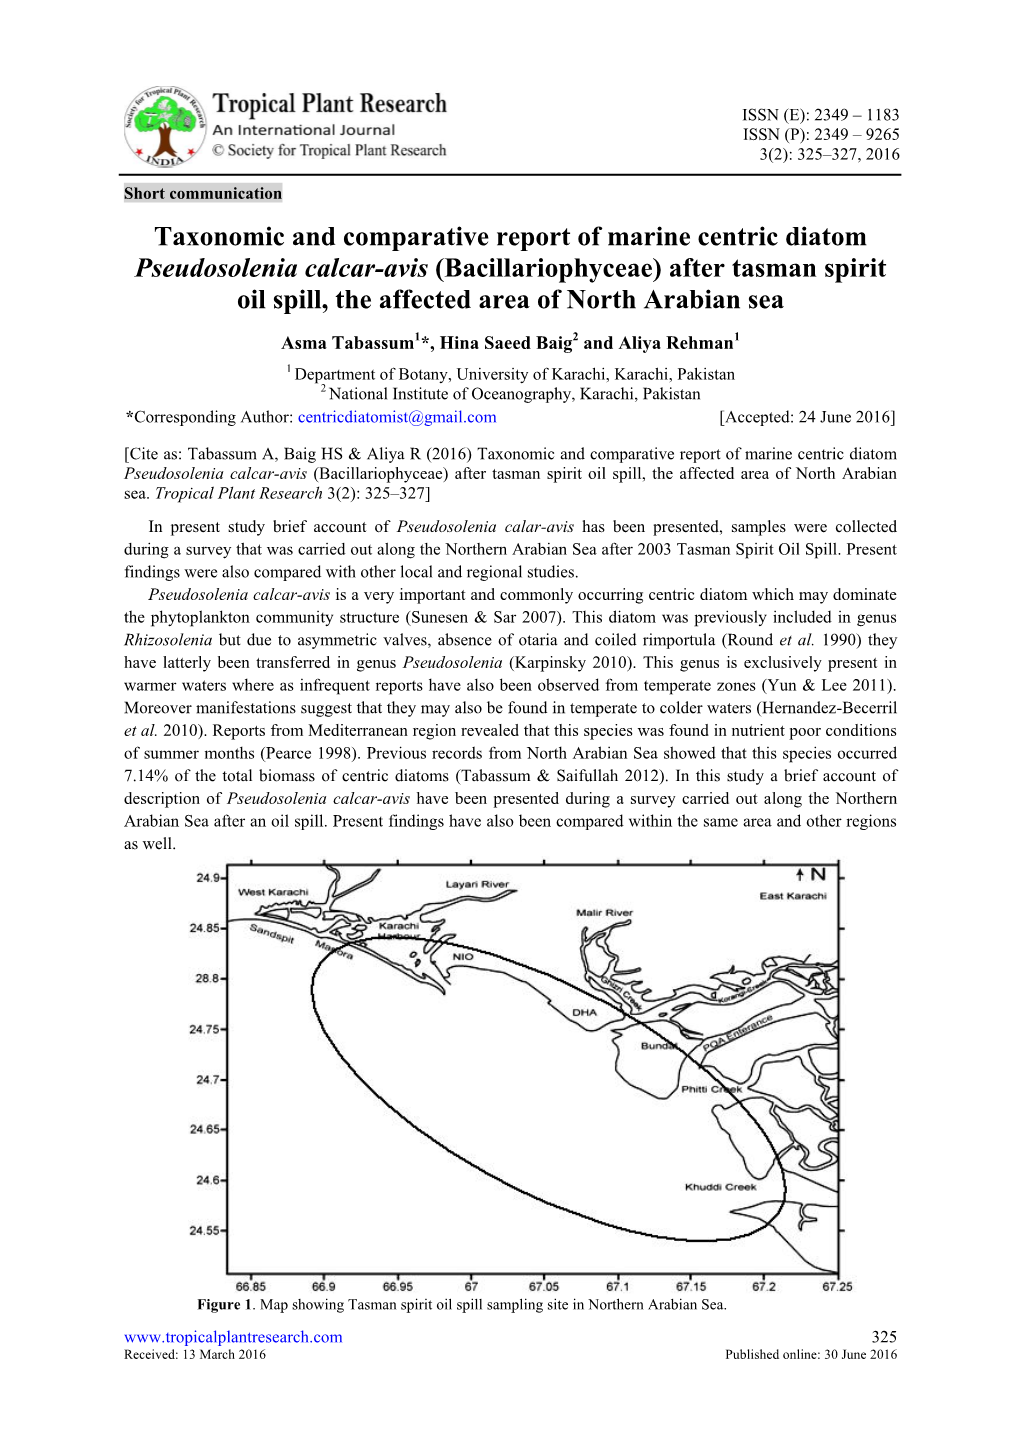 Taxonomic and Comparative Report of Marine Centric Diatom